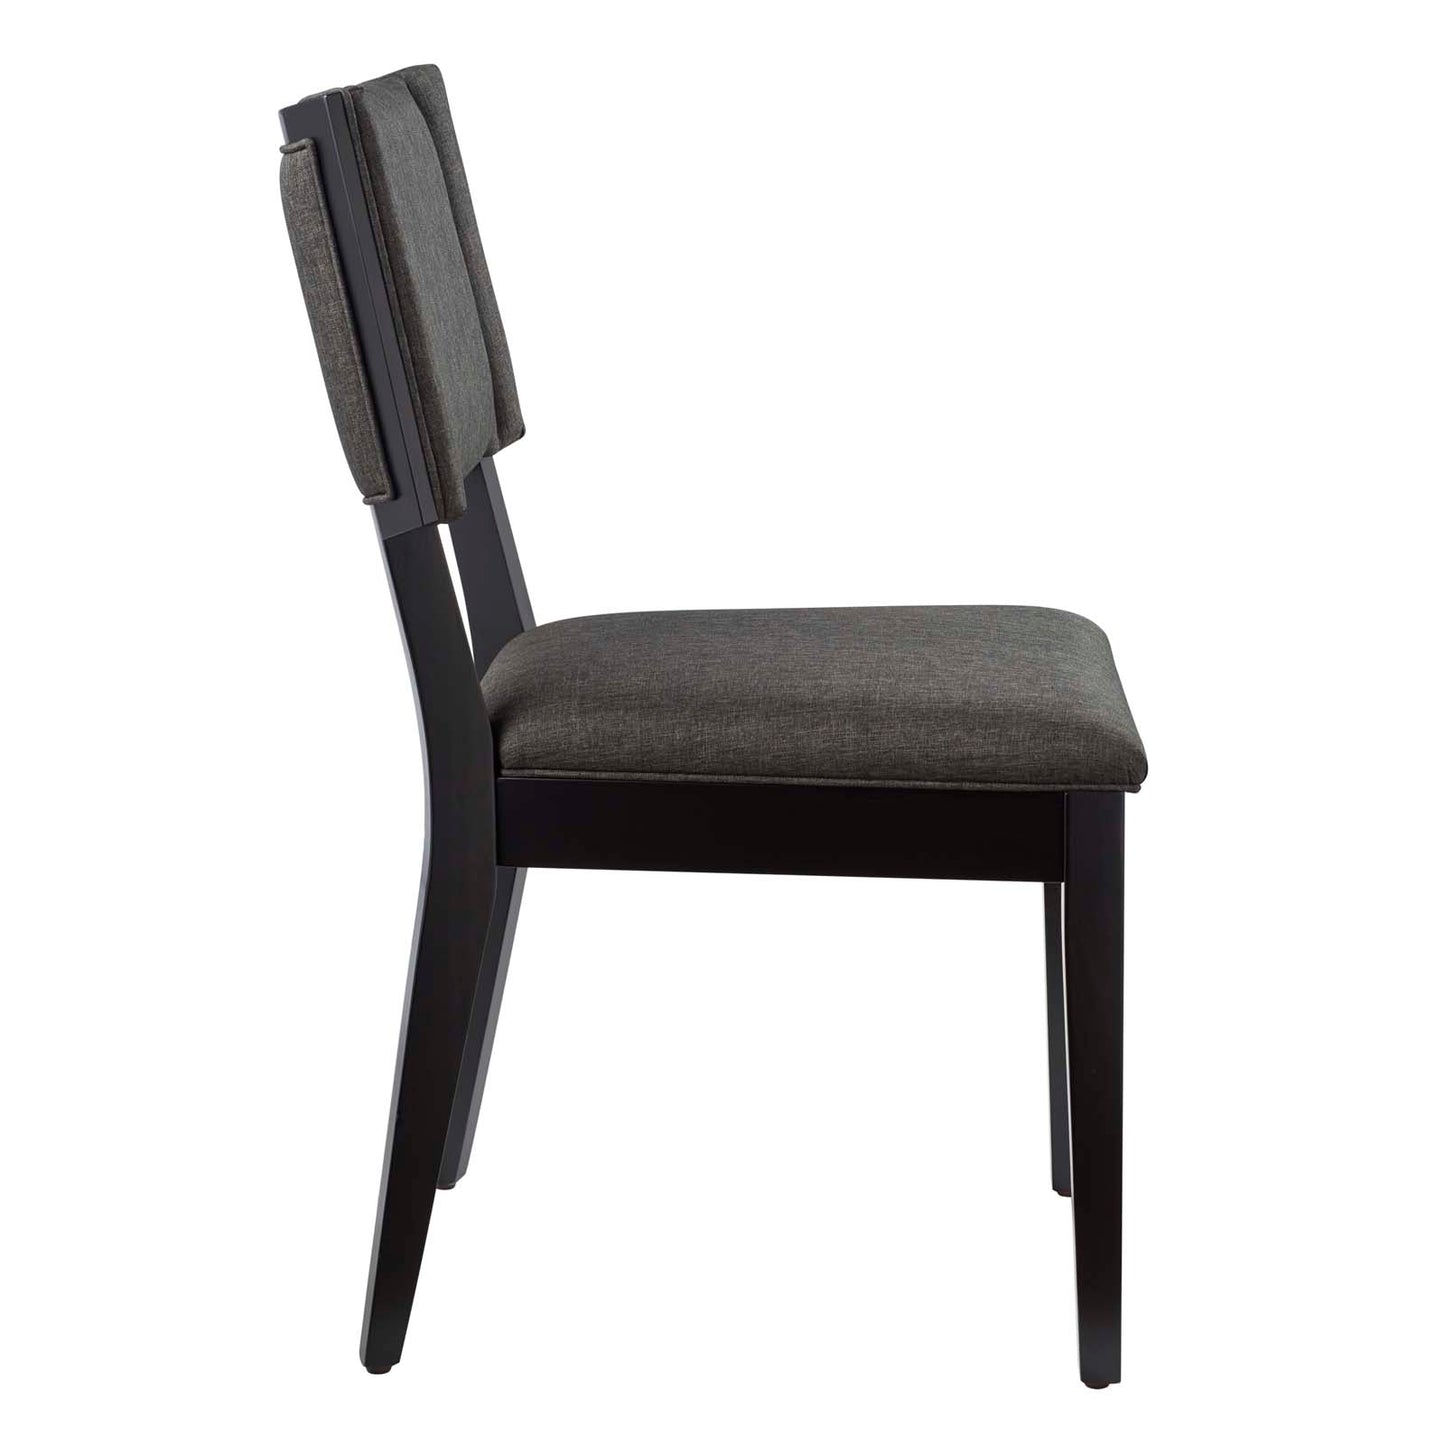 Esquire Dining Chairs - Set of 2 Gray EEI-4559-GRY